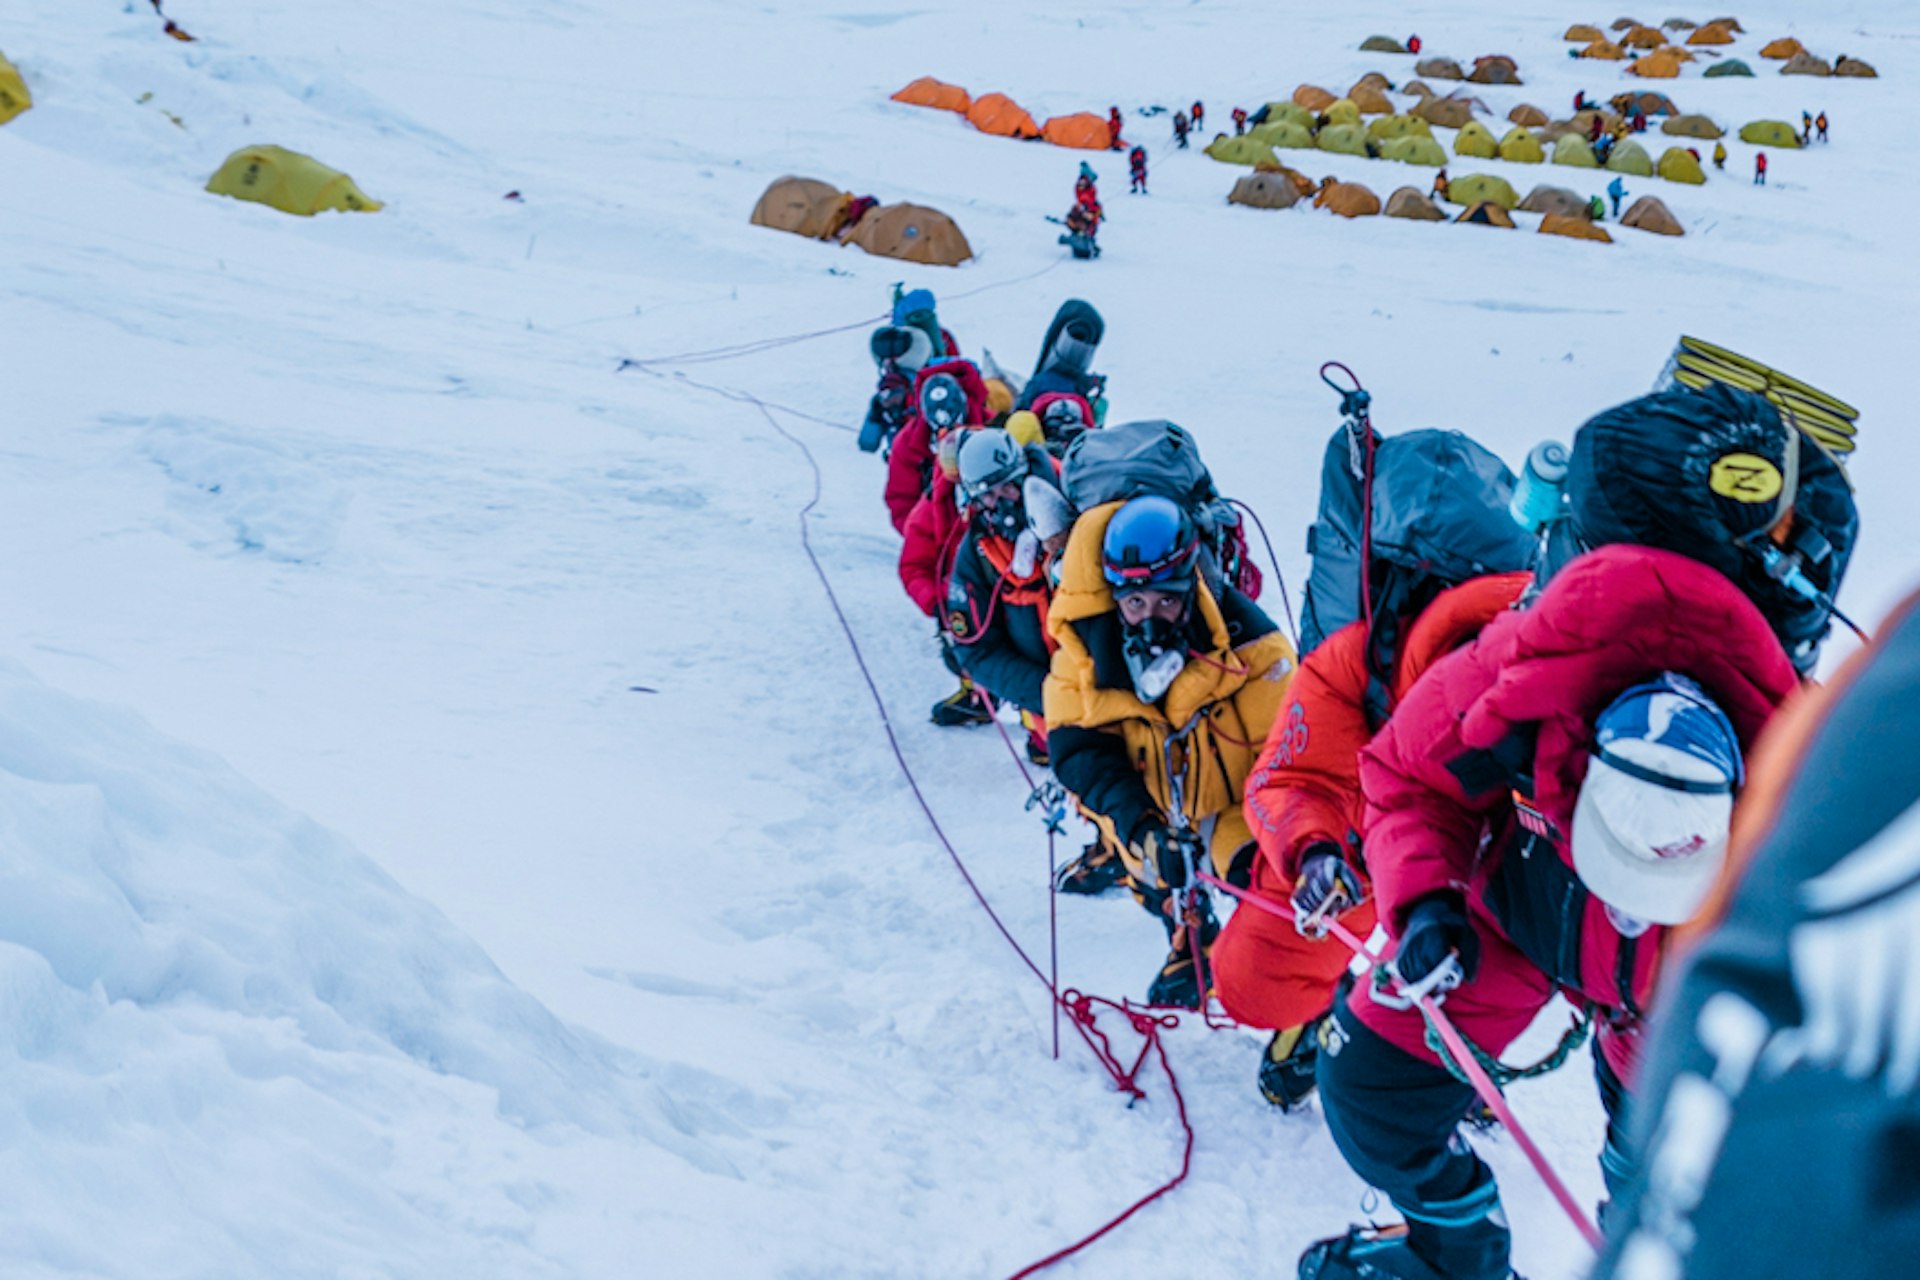 Members of the Full Circle Everest team in a line of climbers making their way up the mountain, with one of the camps in the background